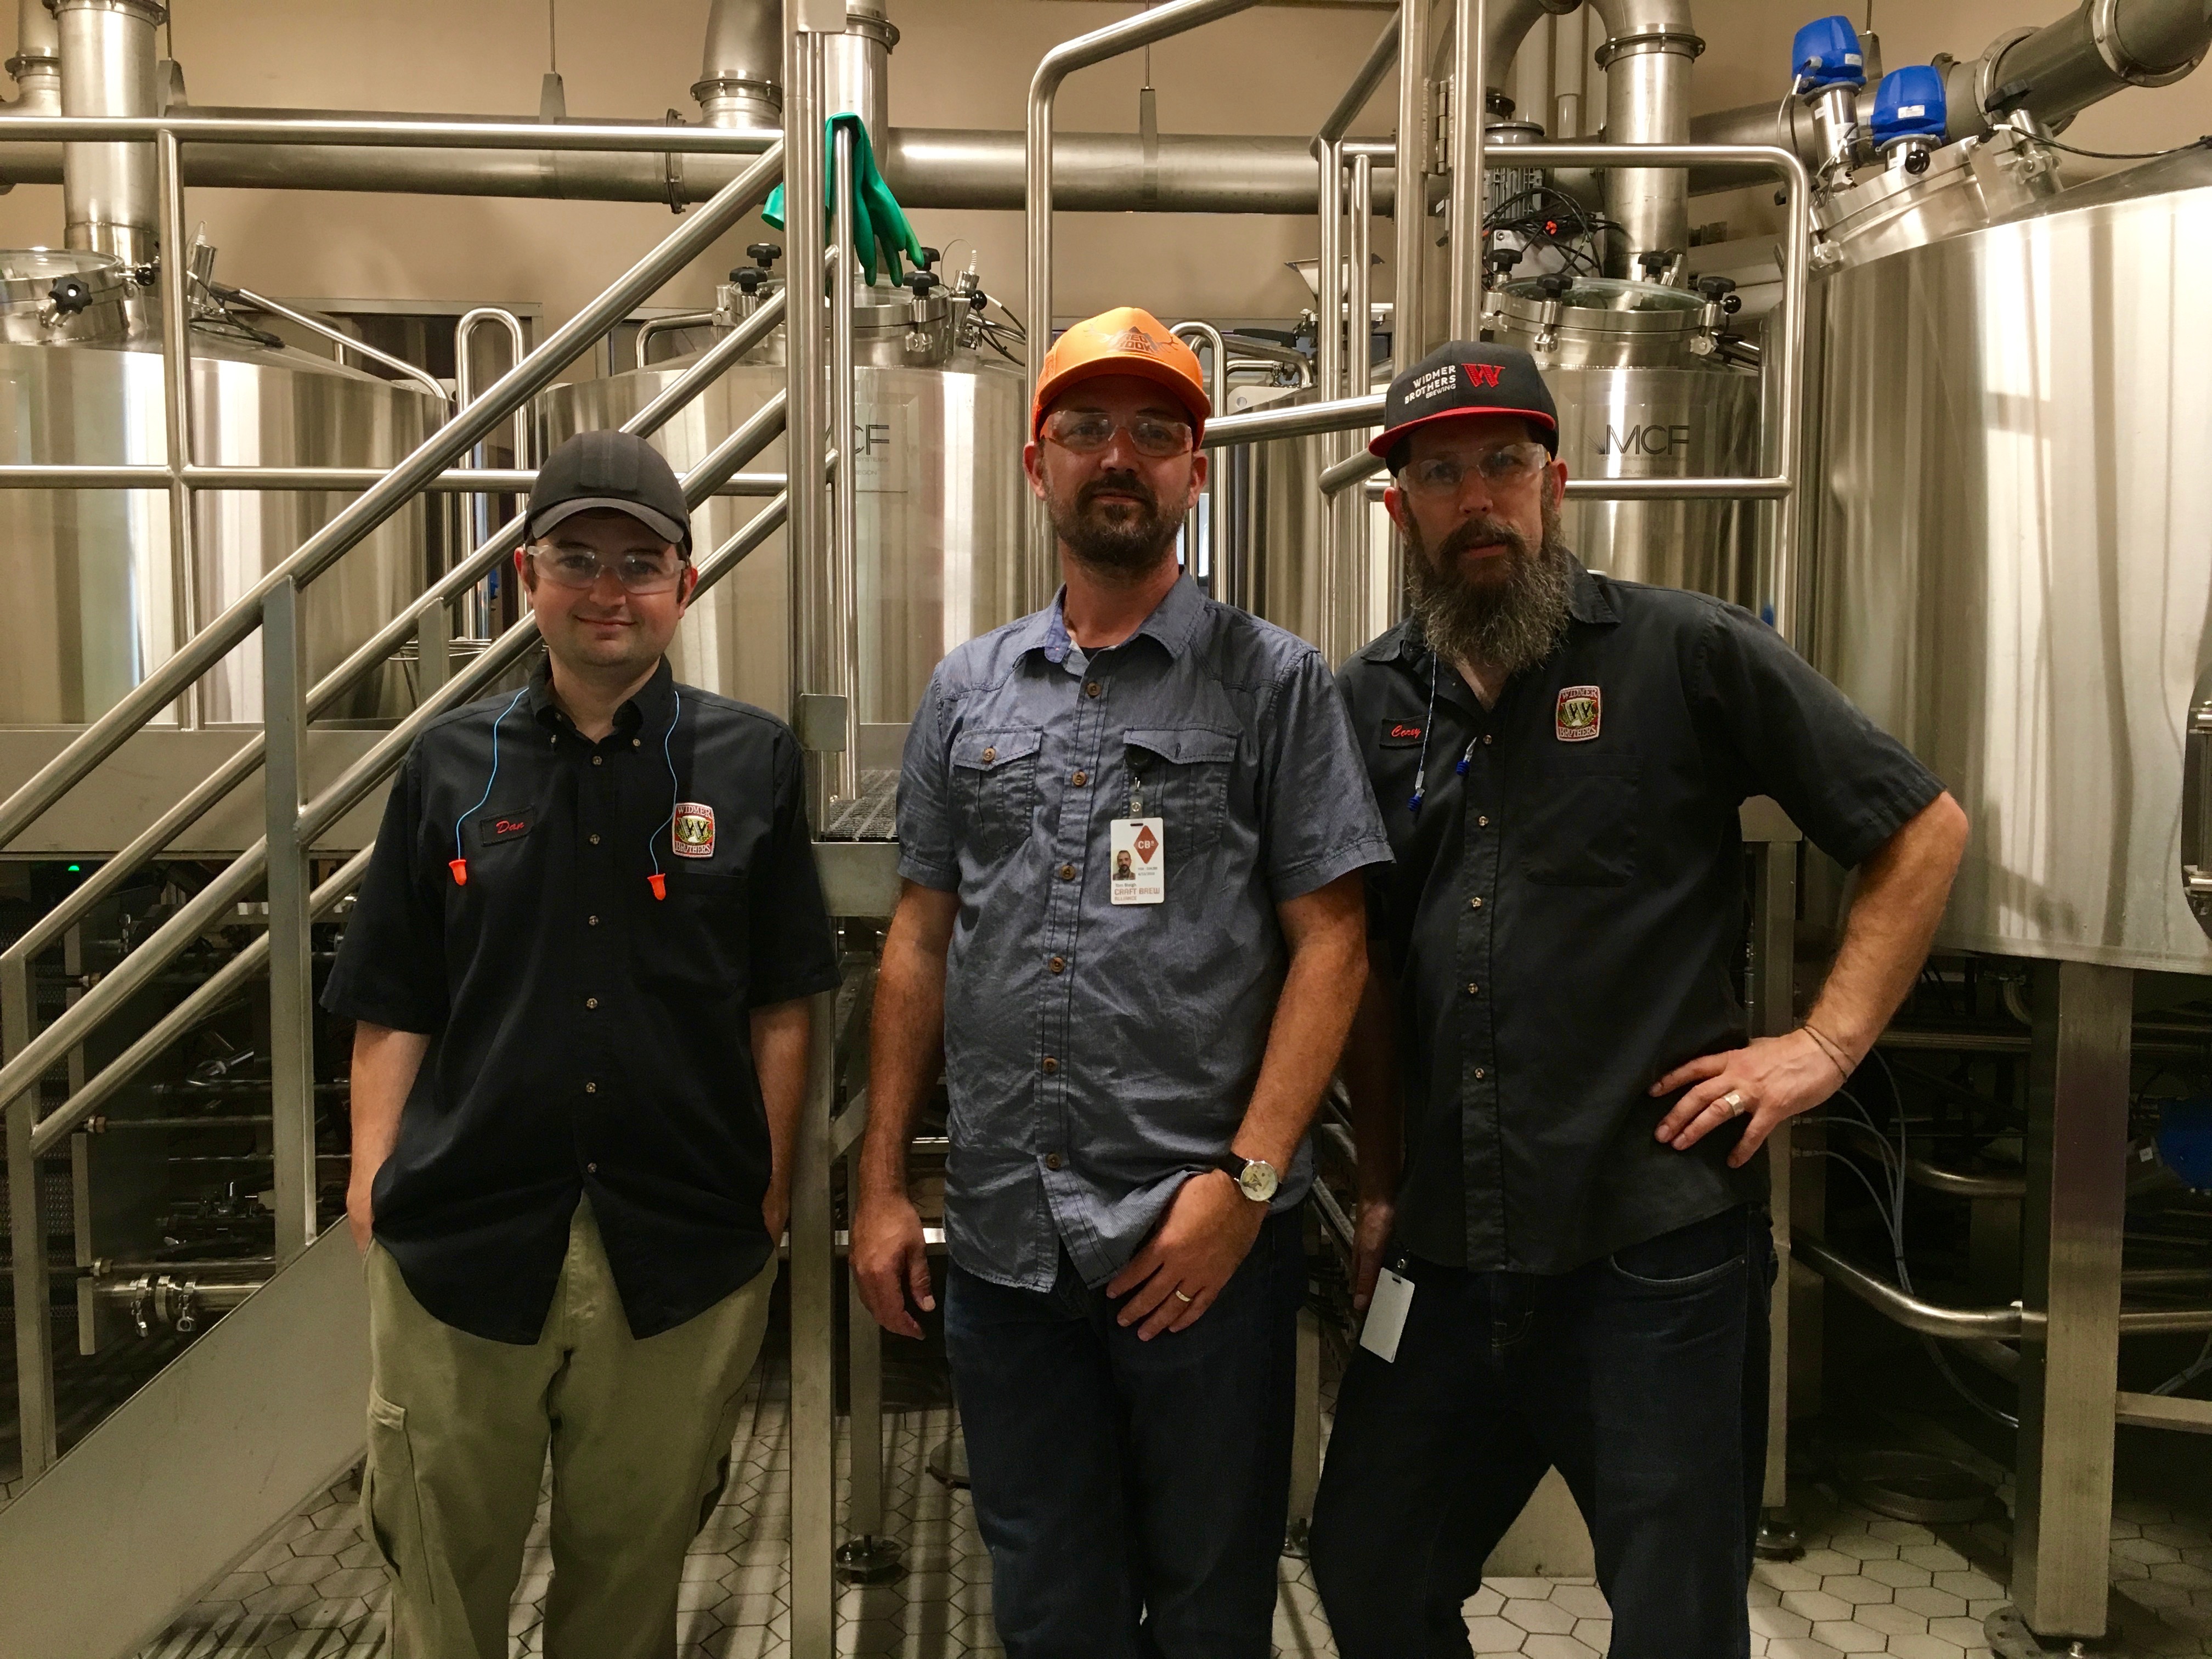 Widmer Brothers Brewing Innovation Brewery team of Dan Munch, Tom Bleigh, and Corey Blodgett.